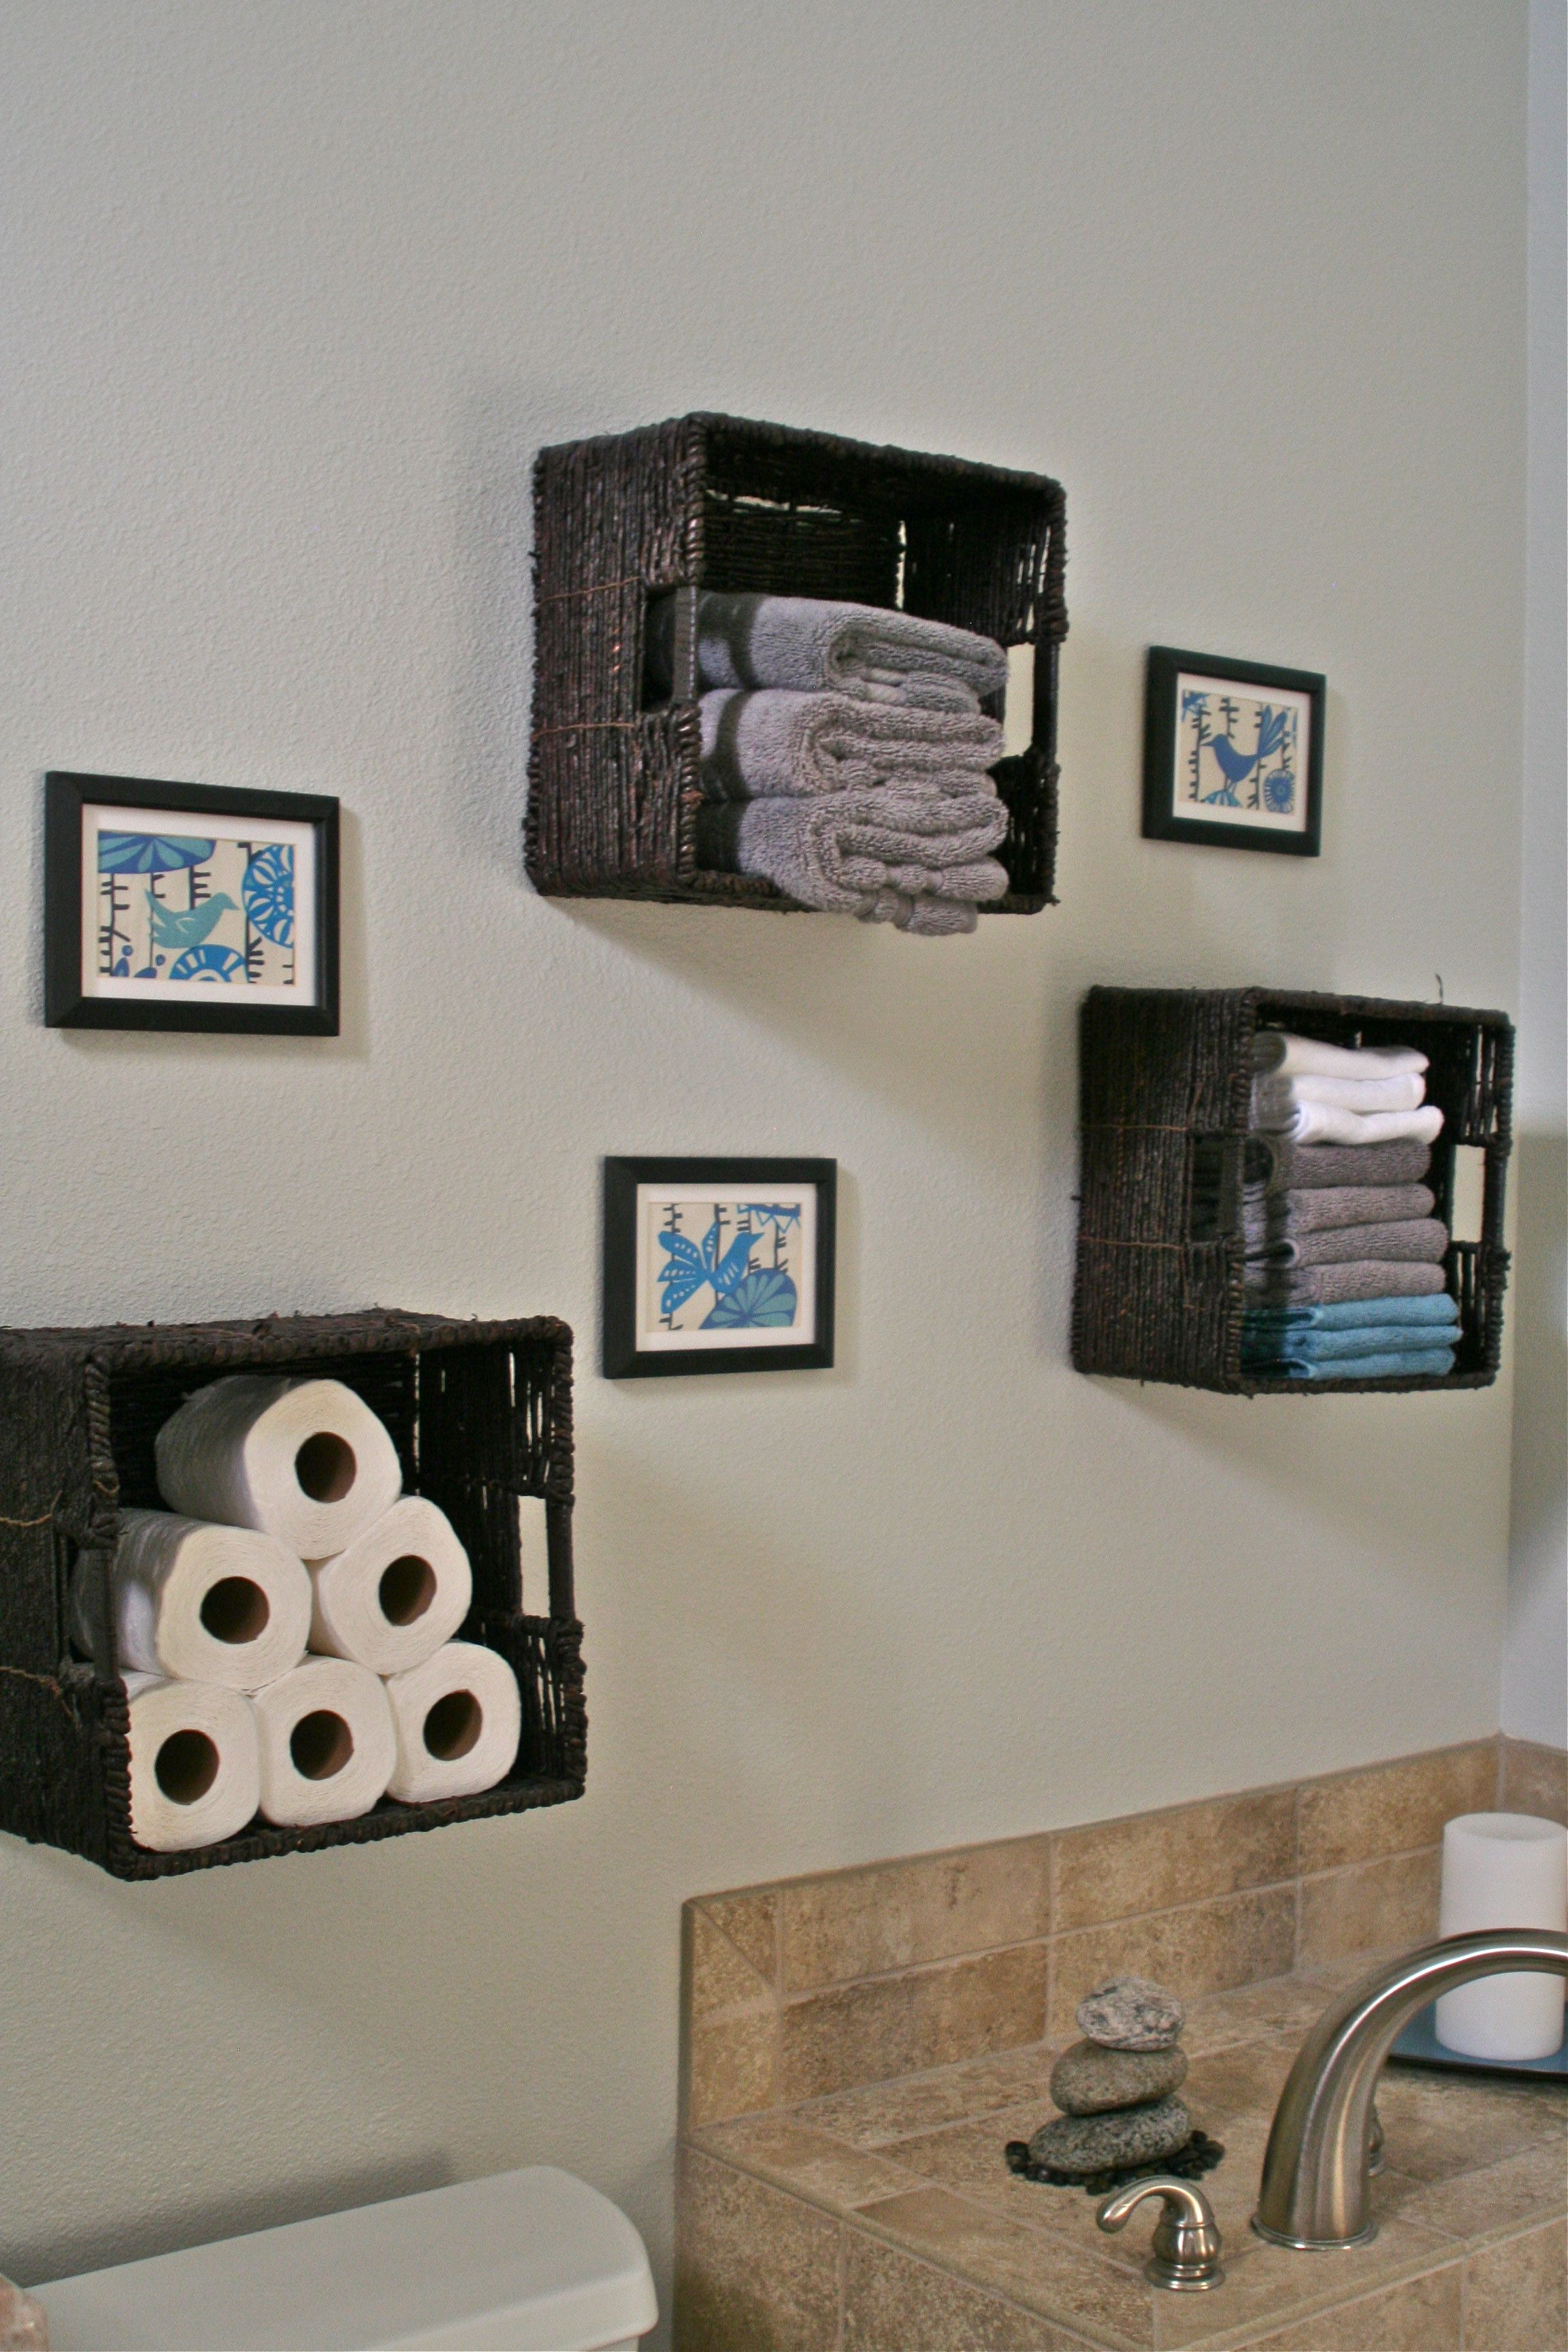 Bathroom Storage Baskets For Towels Toilet Paper Etc Love within dimensions 2304 X 3456